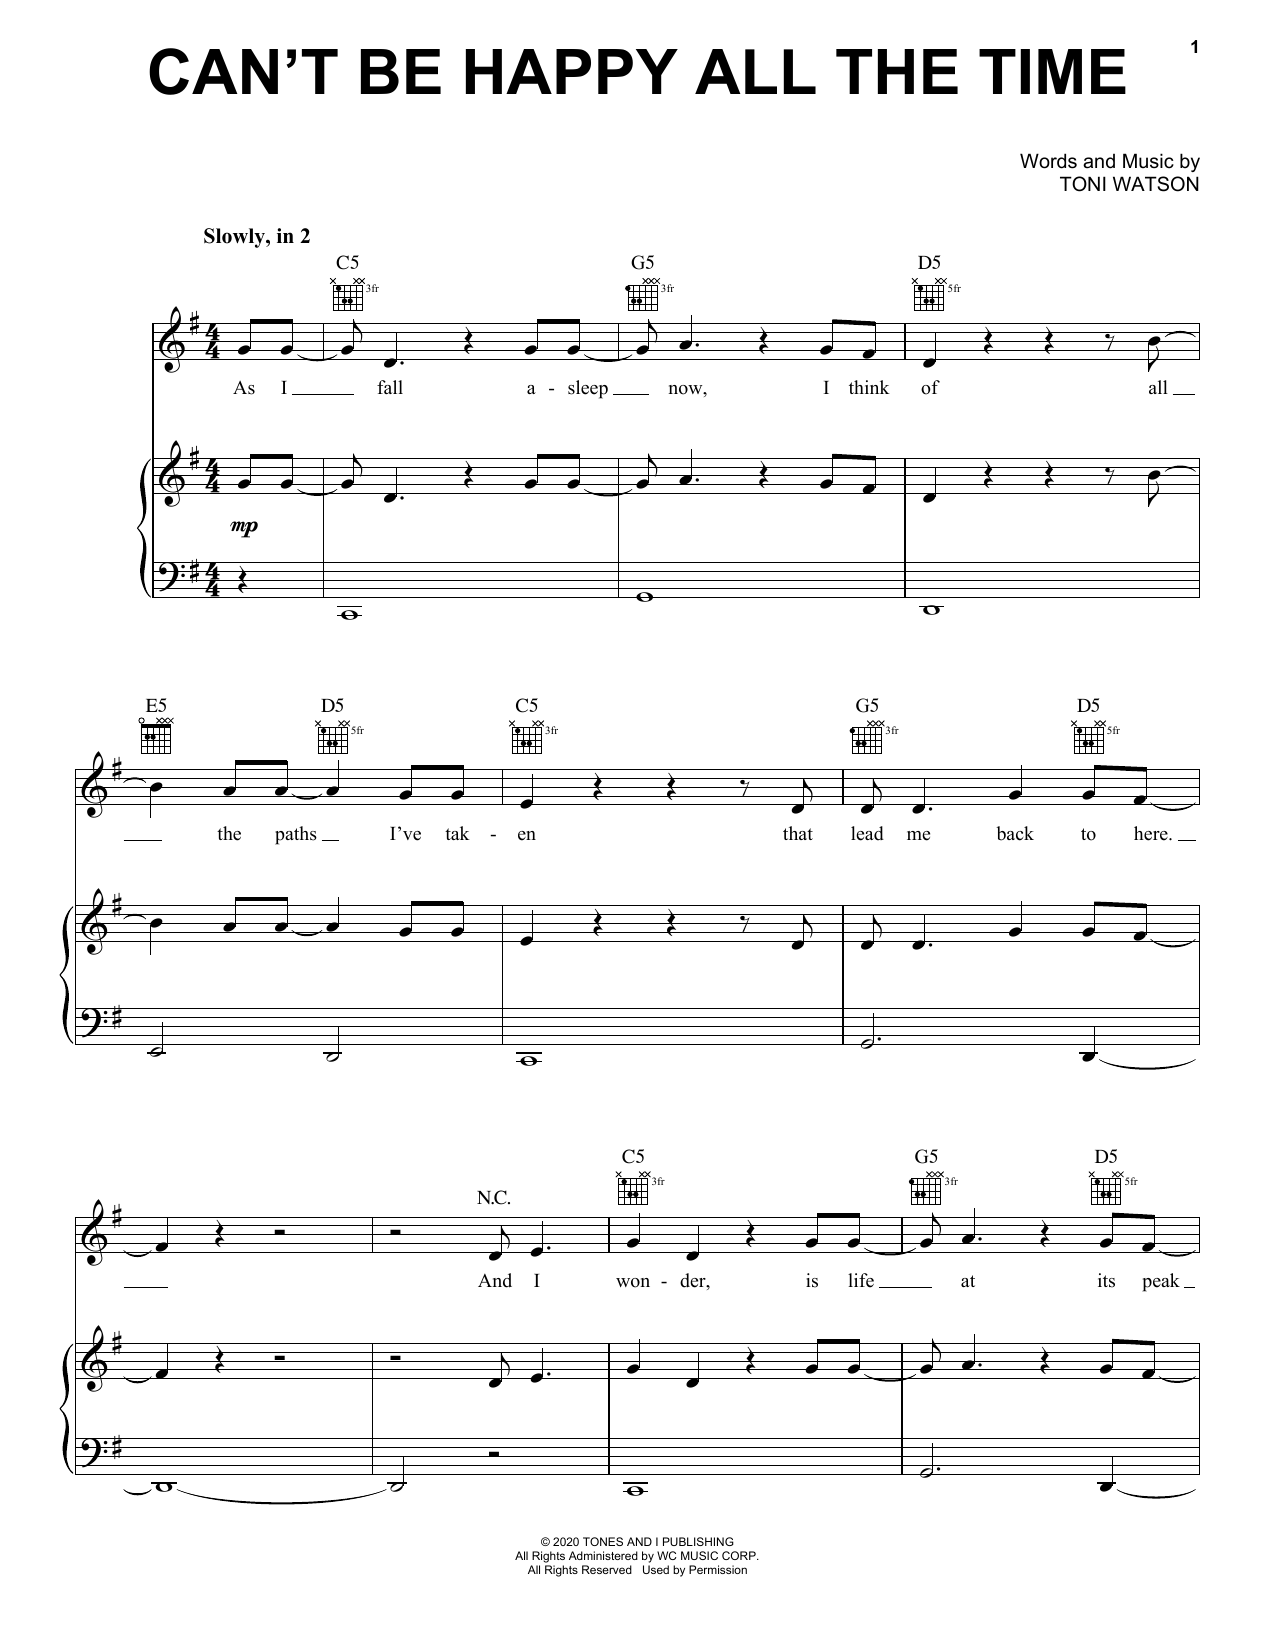 Download Tones And I Can't Be Happy All The Time Sheet Music